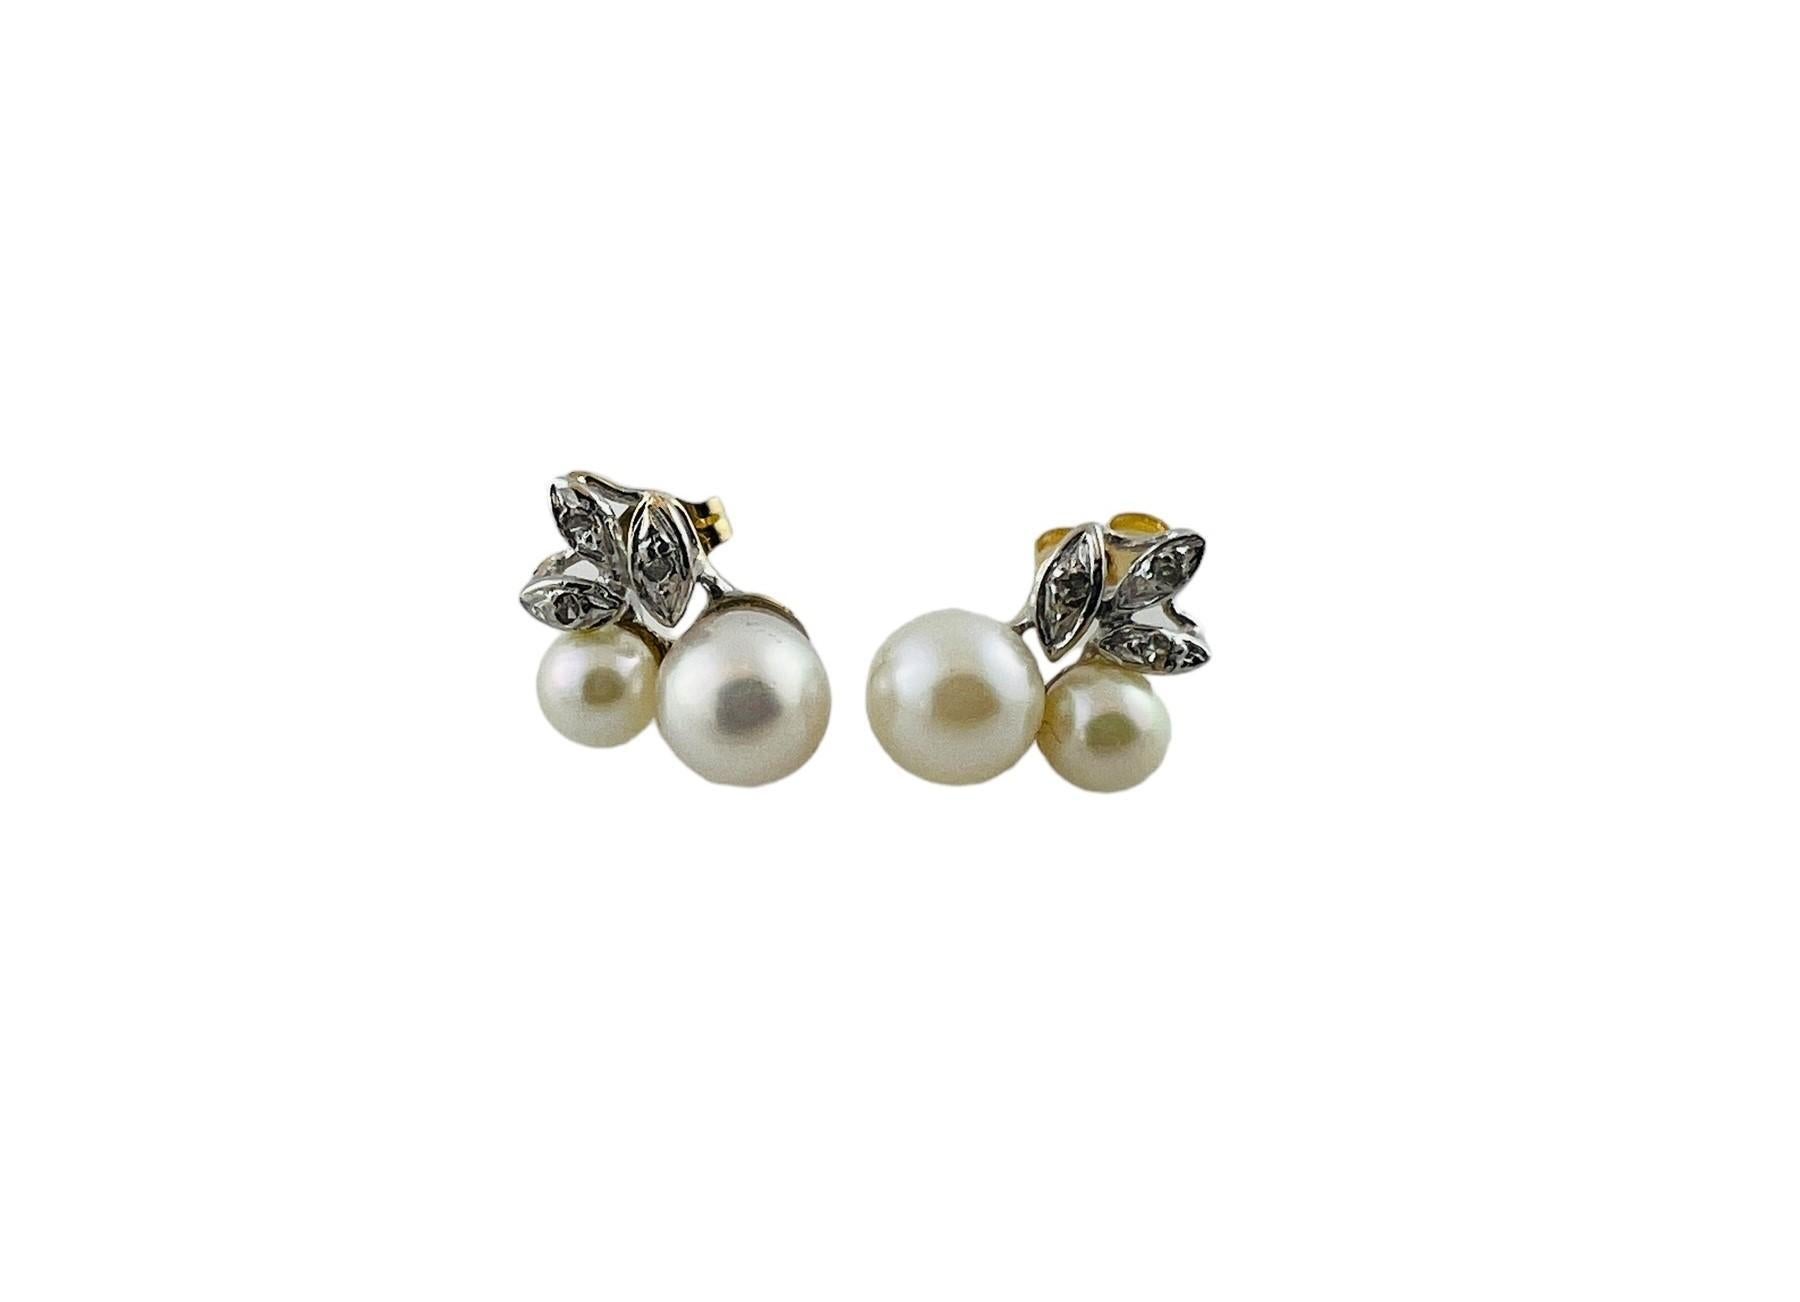 14K Yellow and White Gold Pearl and Diamond Stud Earrings

Each earring features 2 pearls and 3 single cut diamonds. 

Diamond total carat weight approx. 0.06 - Each earring stamped 0.03

Diamonds are set in white gold leaf shapes

Back of earring,